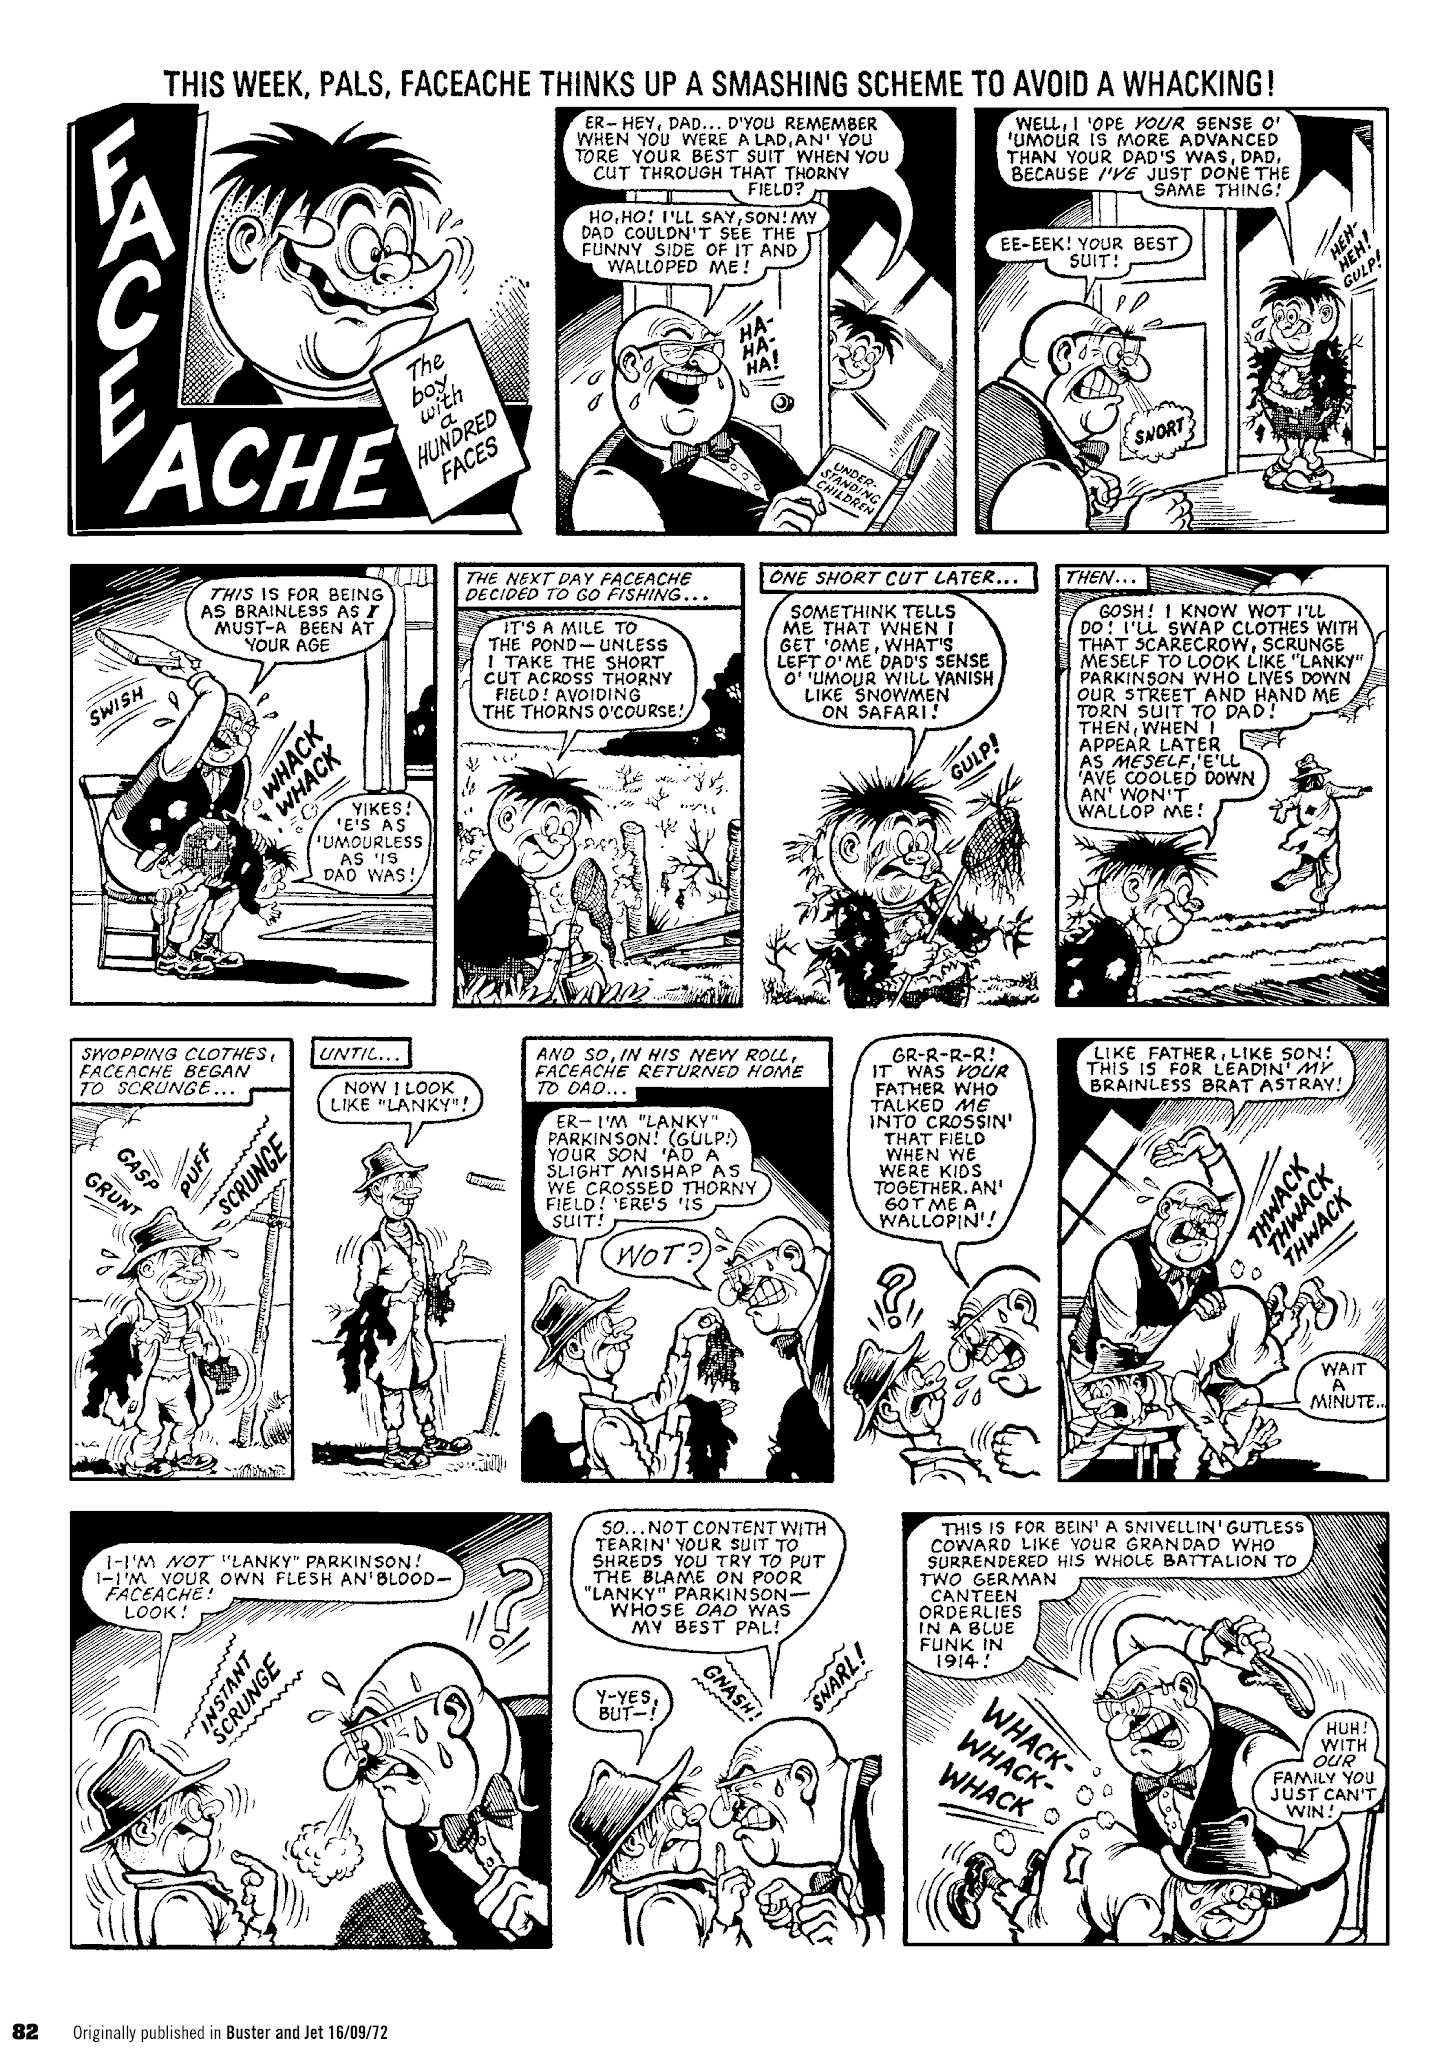 Read online Faceache: The First Hundred Scrunges comic -  Issue # TPB 1 - 84